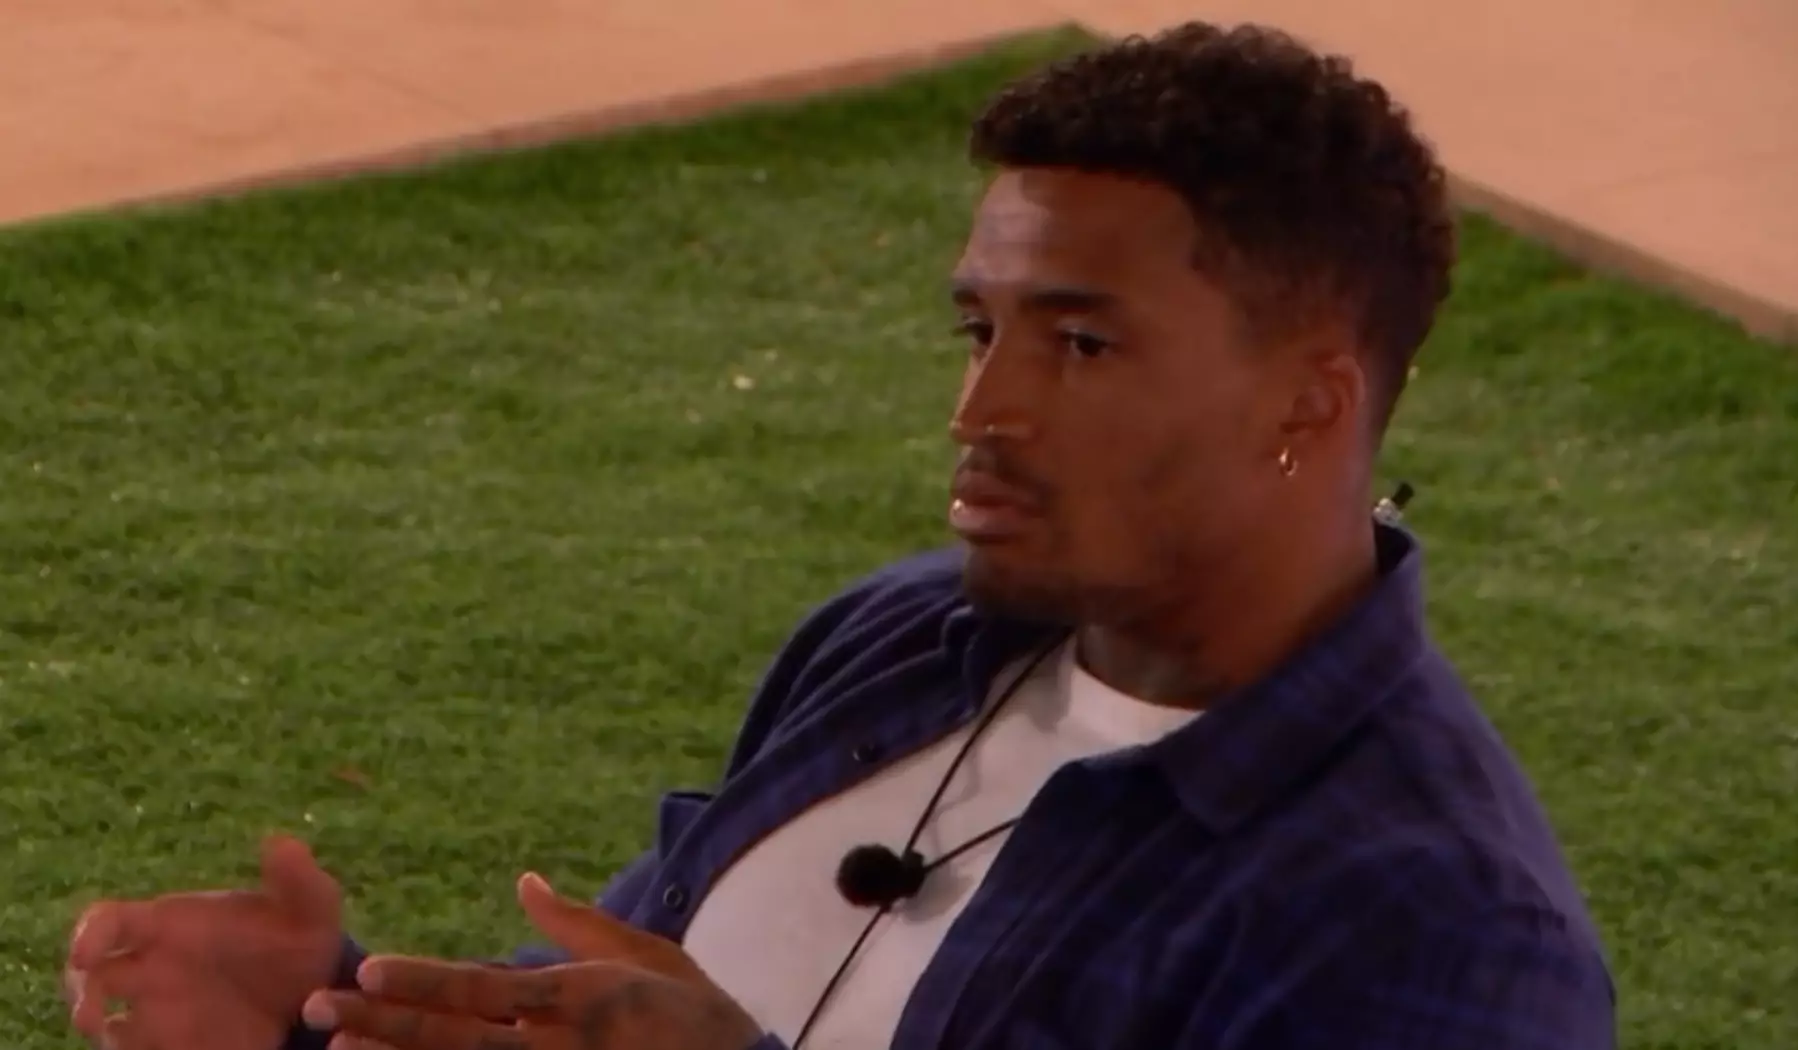 Fans aren't happy with how Michael spoke to Amber (